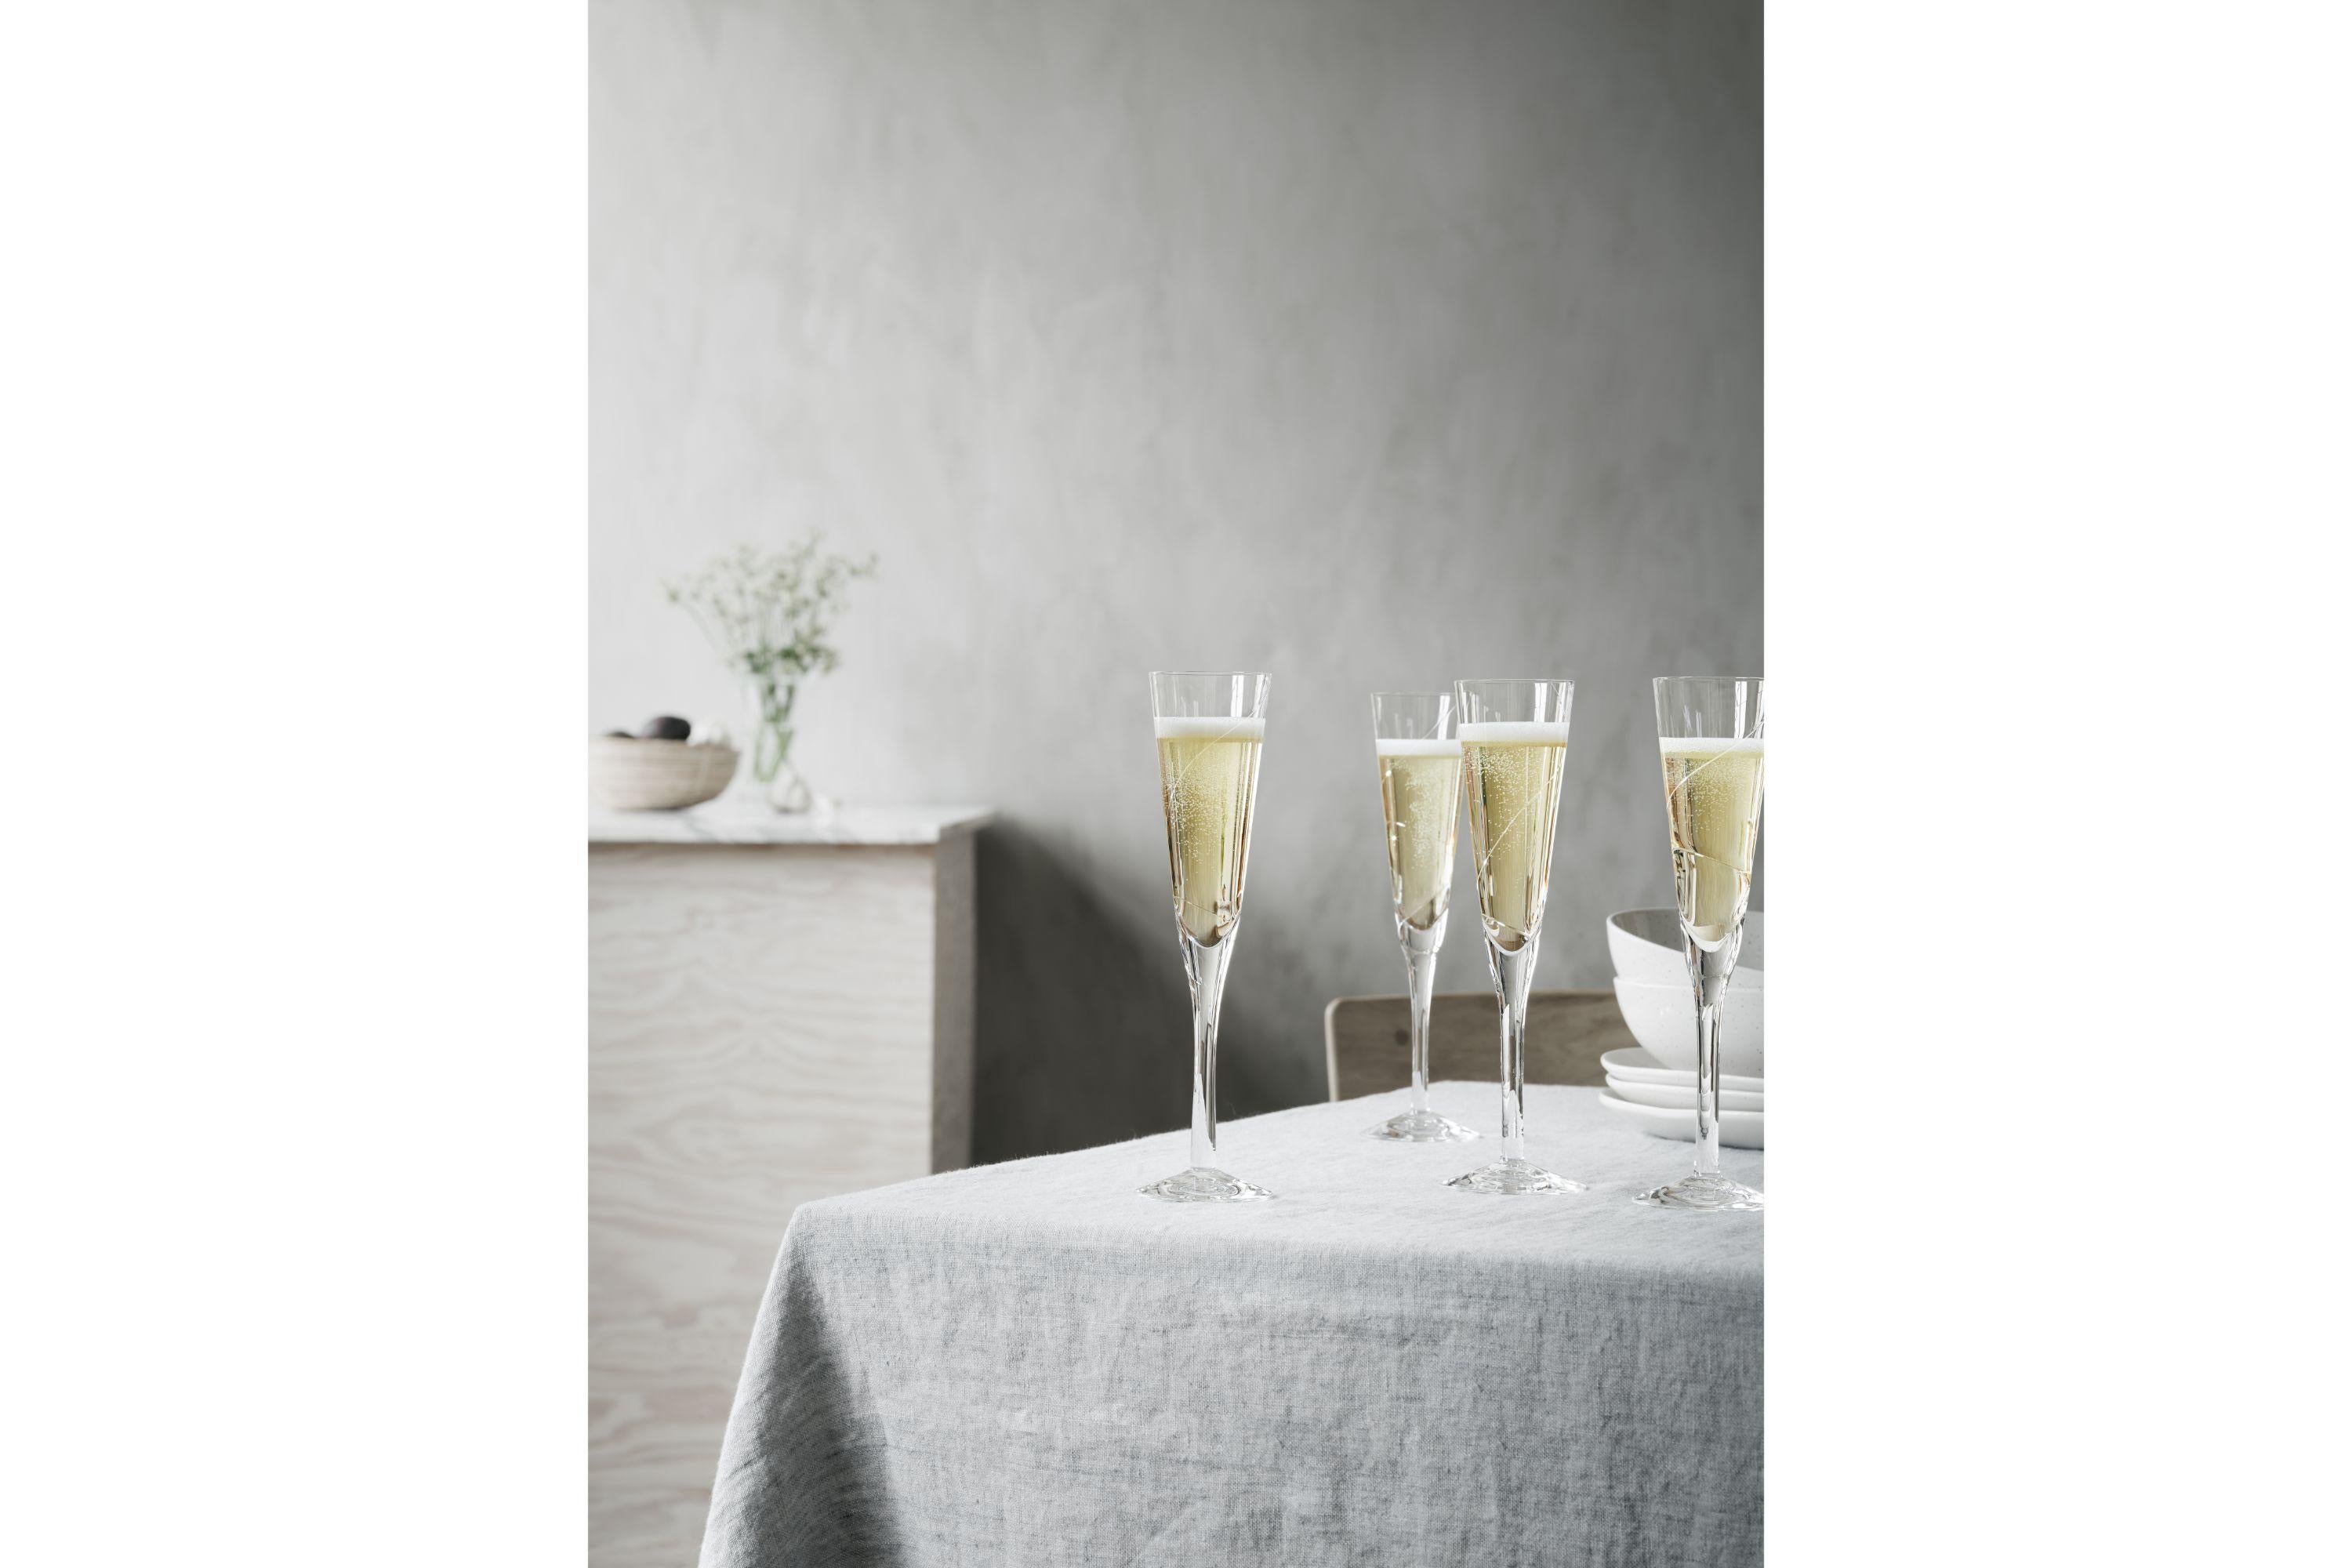 Line from Kosta Boda has been in production since 1982. The collection is unique, with a thread of spun glass applied on each product by hand – a symbol of high-quality Swedish craftsmanship from Kosta Glassworks. The mouth-blown champagne glass has